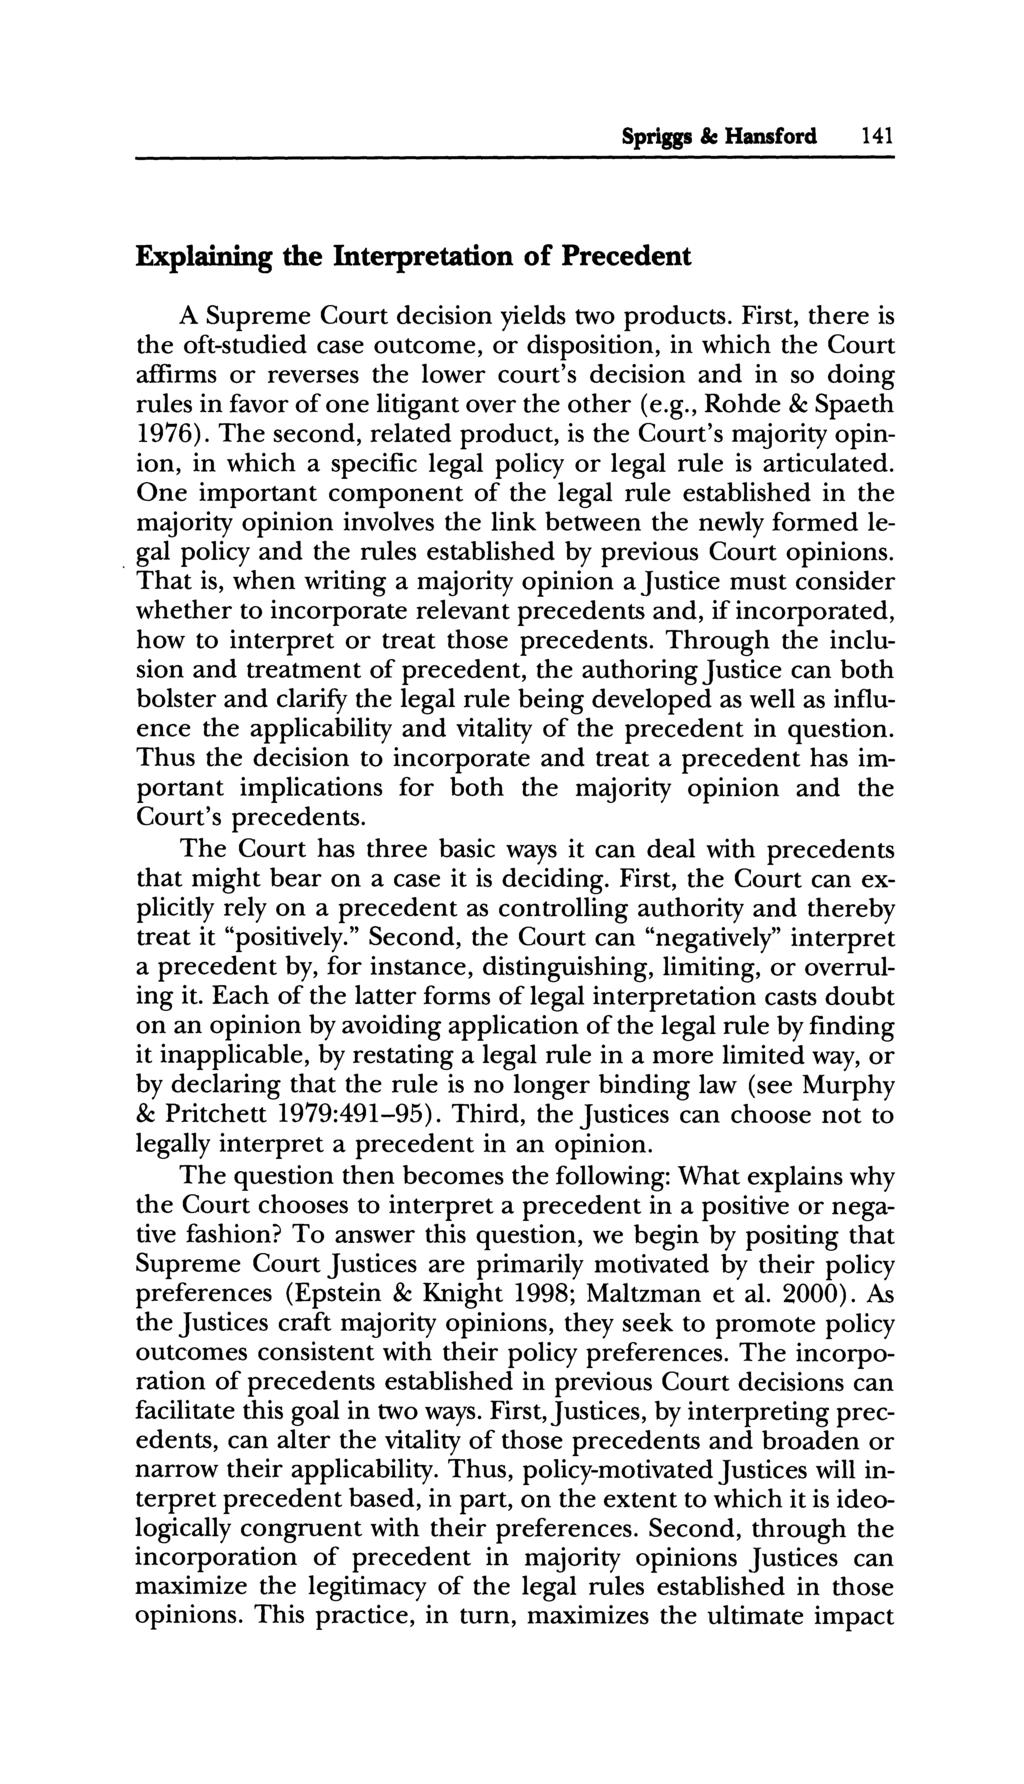 Spriggs & Hansford 141 Explaining the Interpretation of Precedent A Supreme Court decision yields two products.